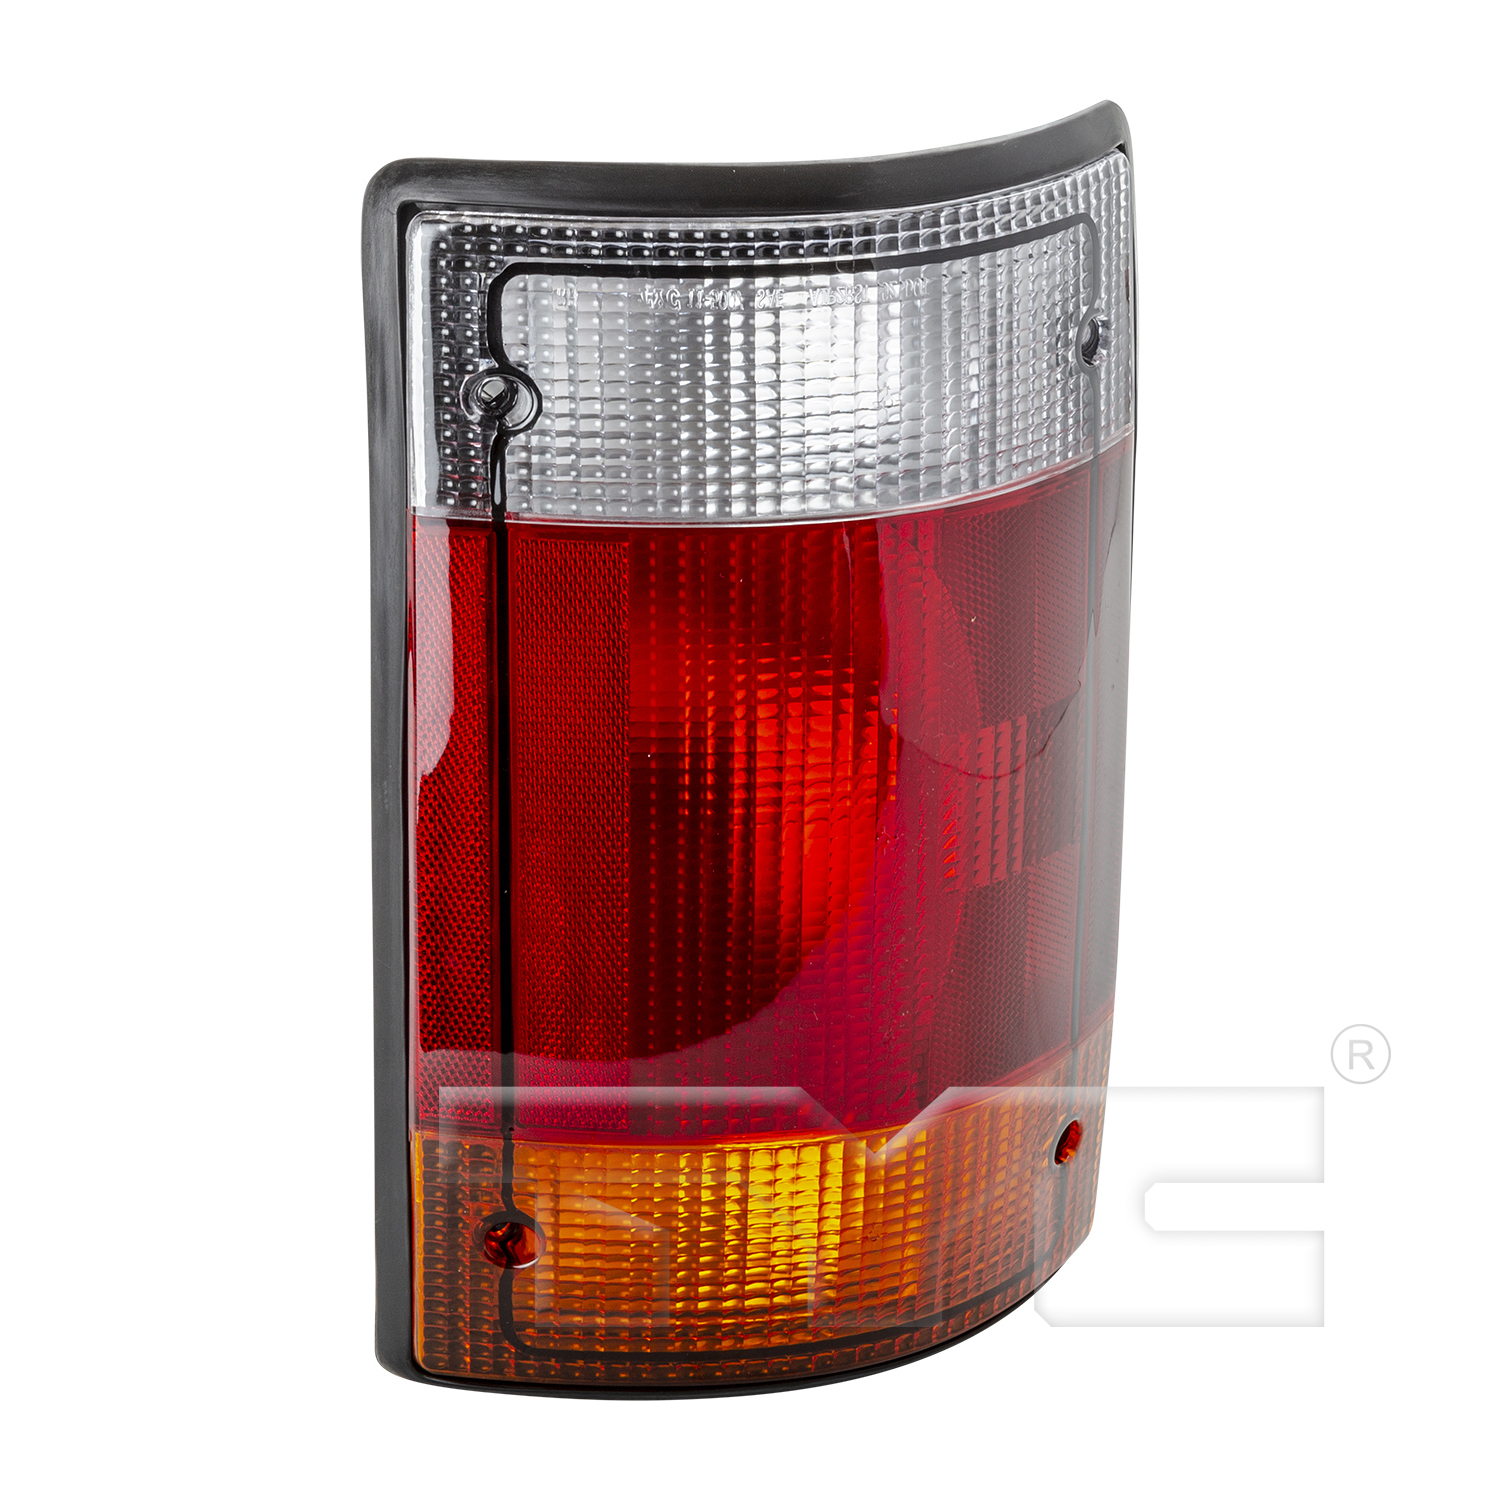 Aftermarket TAILLIGHTS for FORD - E-350 ECONOLINE CLUB WAGON, E-350 ECONOLINE CLUB WAGON,92-94,LT Taillamp assy